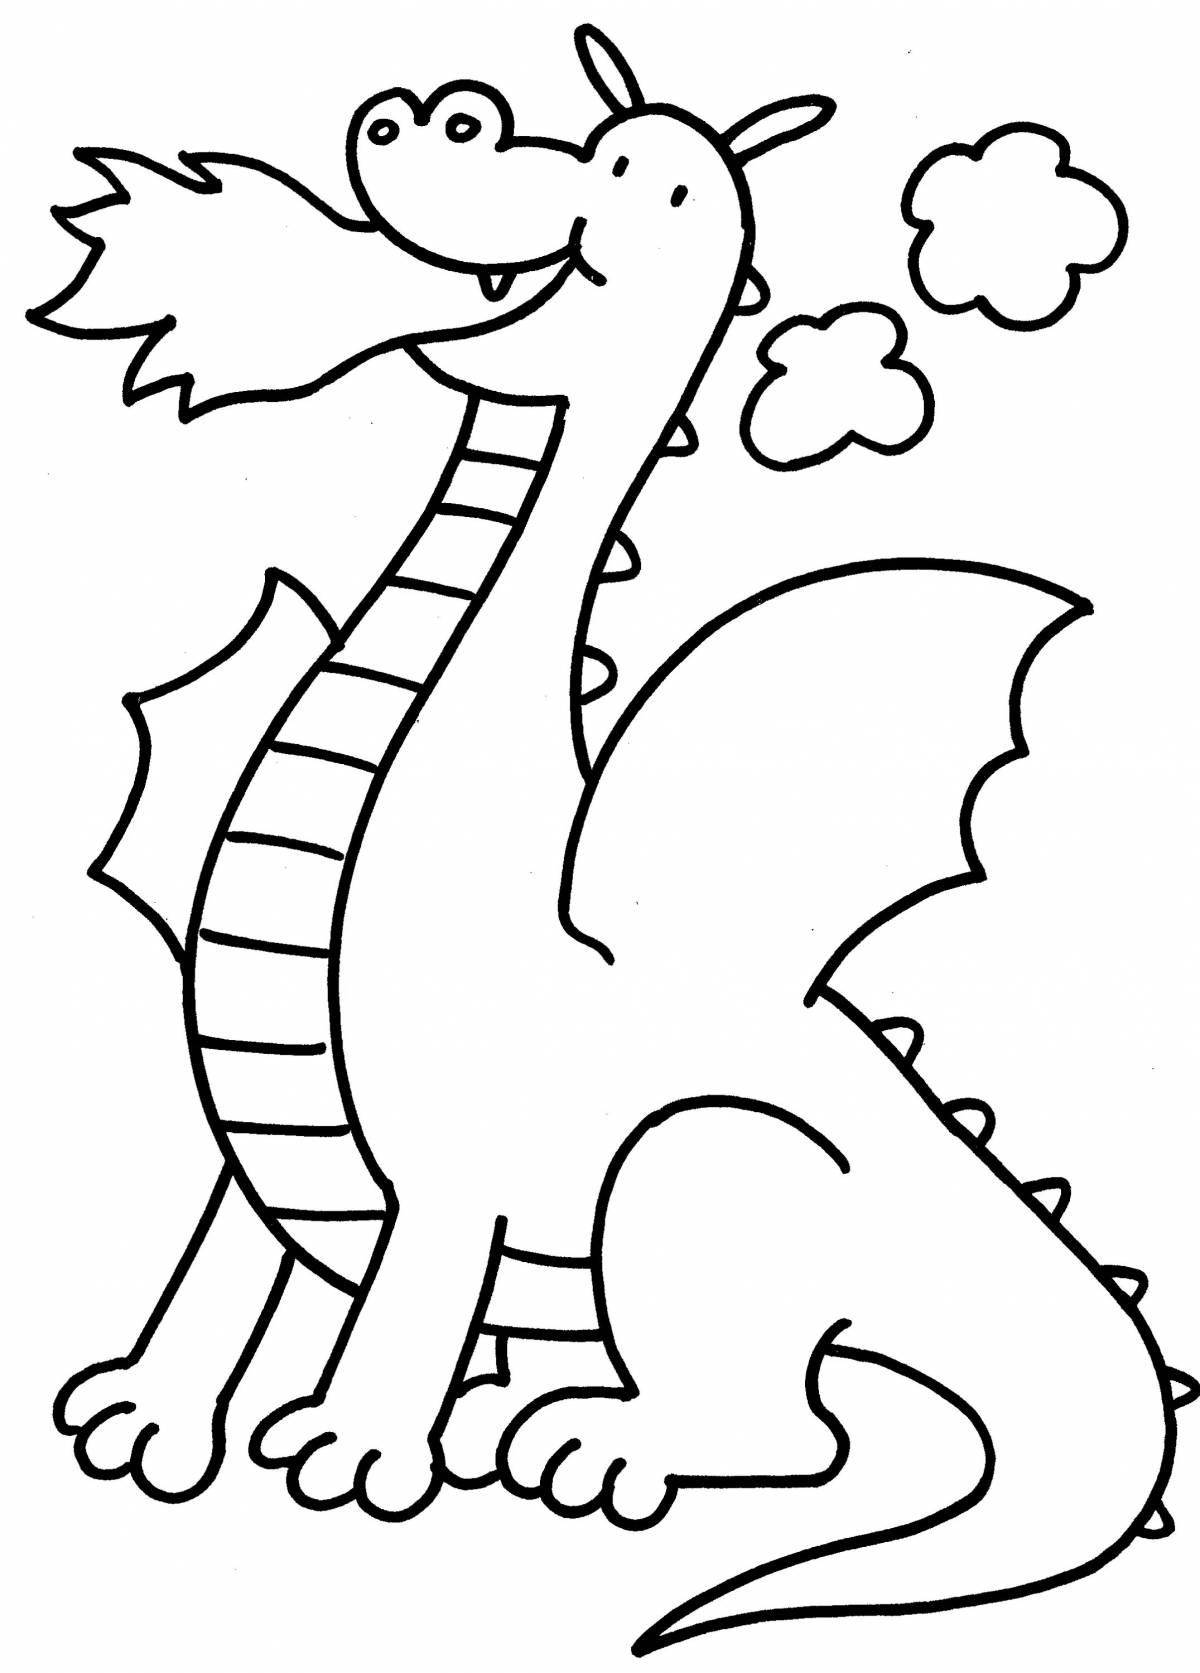 Large coloring dragon for kids